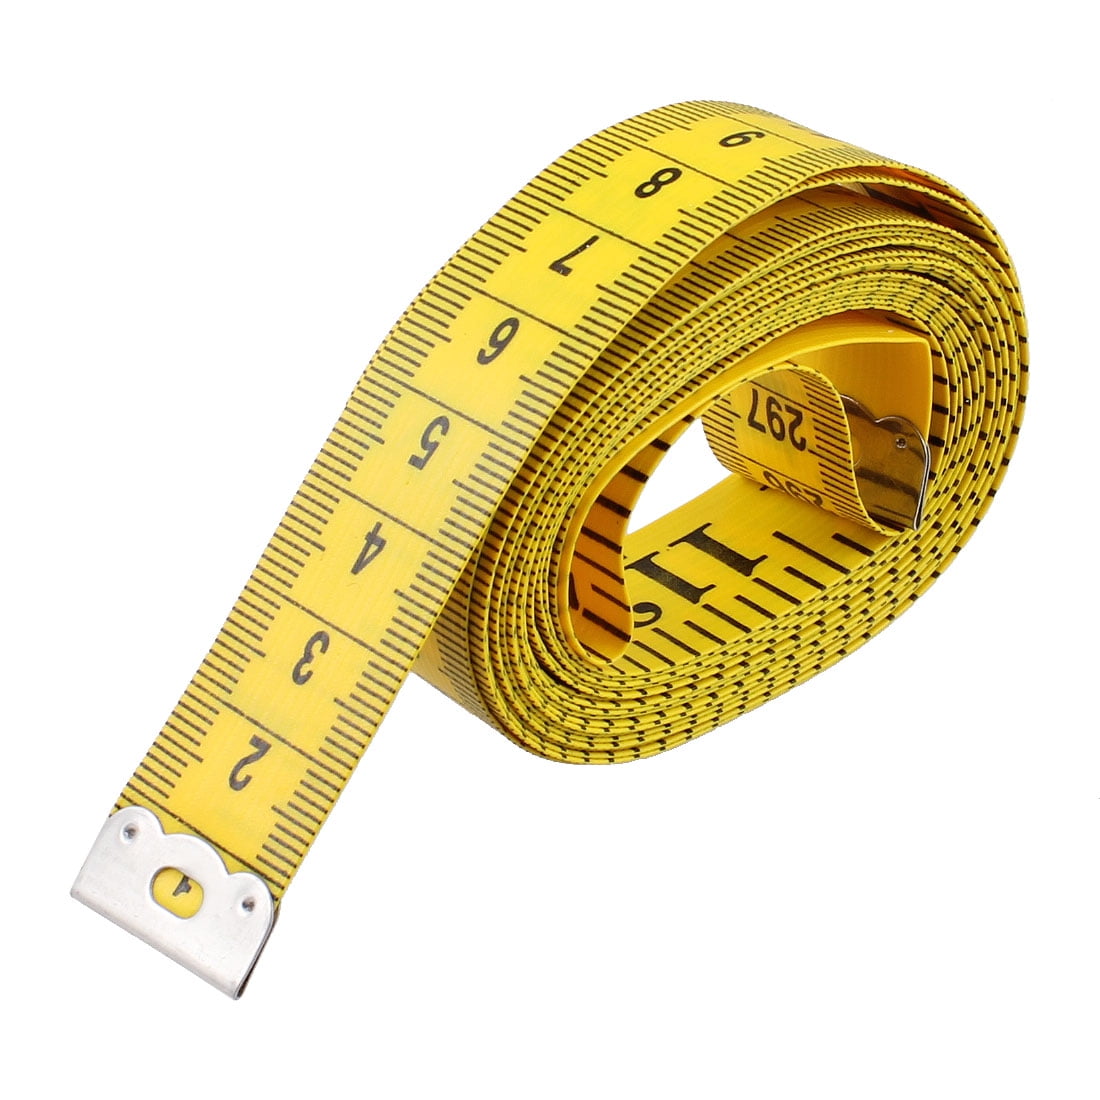 Flexible Tailor Measure Tape Seamstress Body Measuring Ruler Soft Sewing Tools 